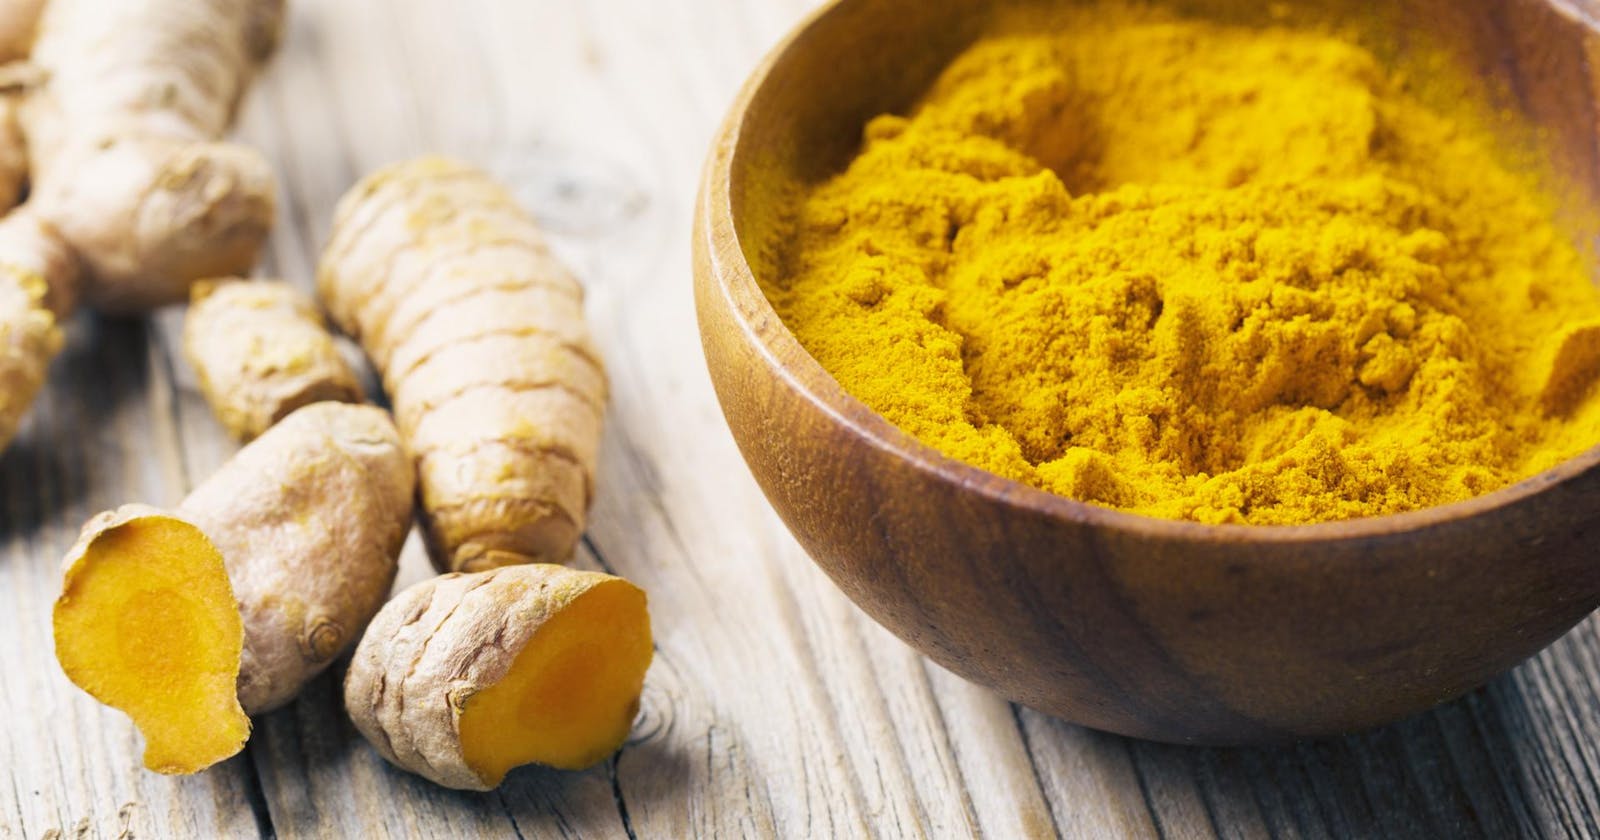 10 Surprising Health Perks of the Golden Spice